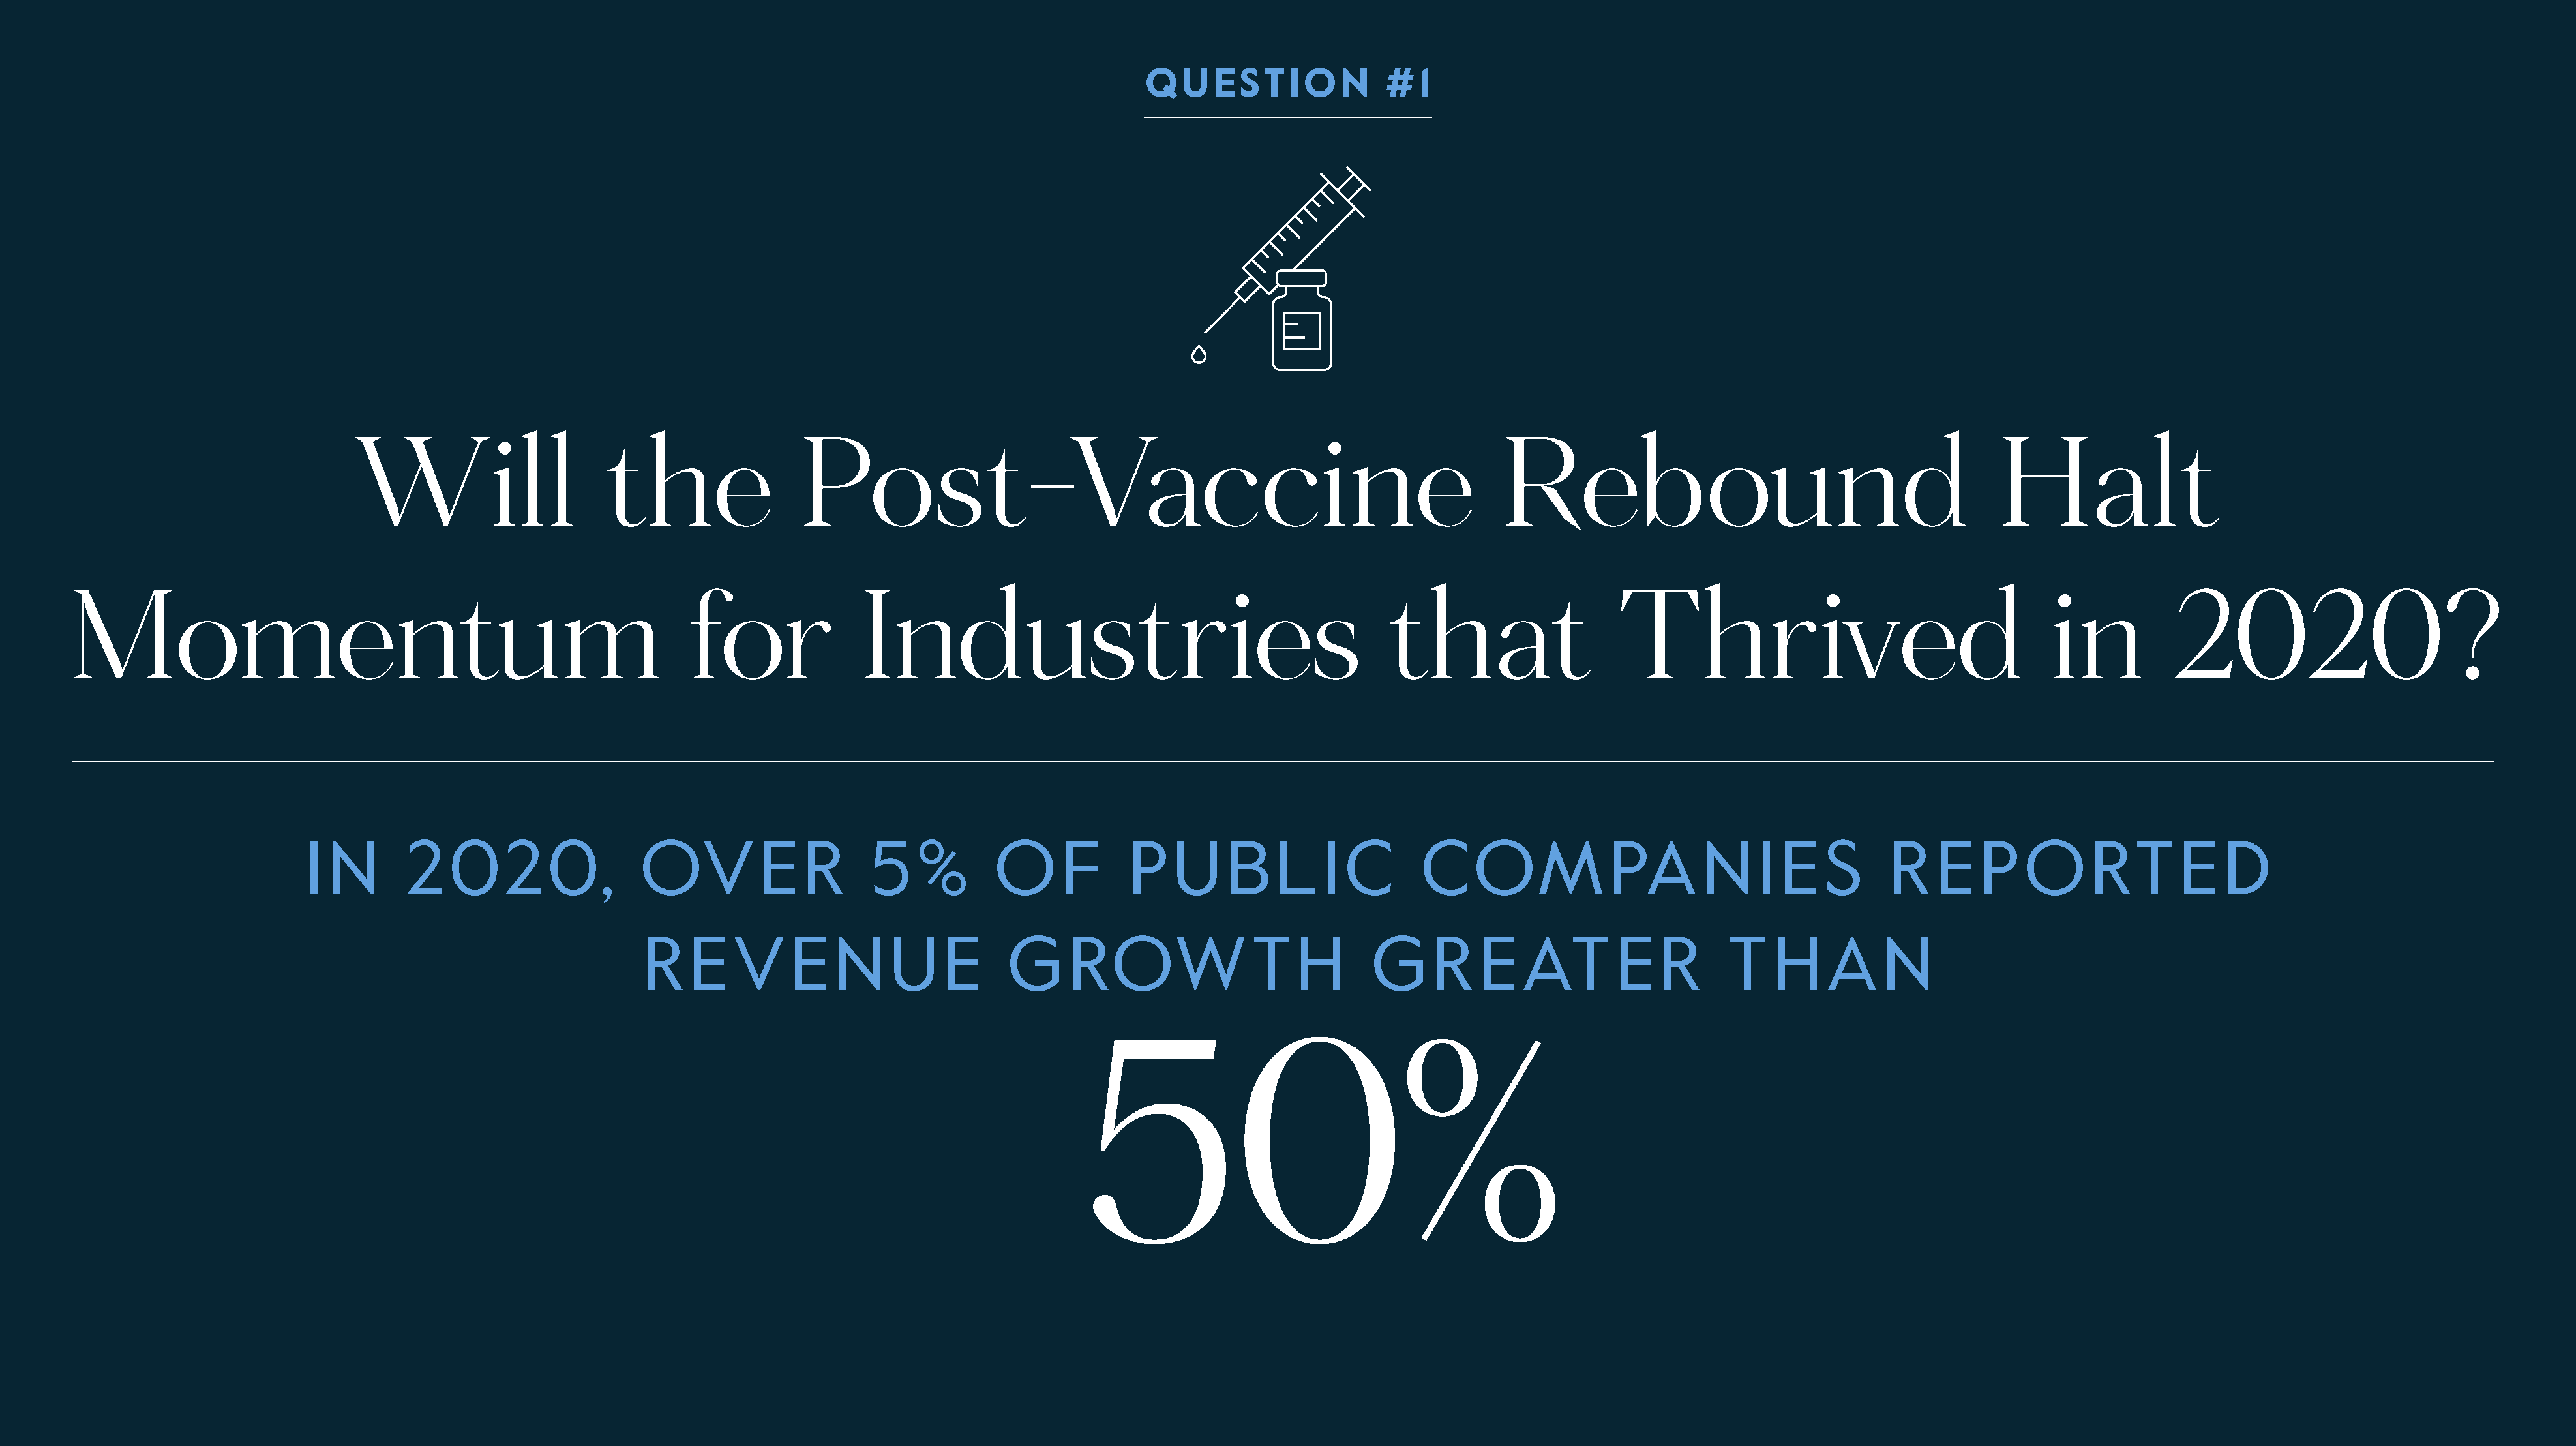 Will the post-vaccine rebound halt momentum for industries that thrived in 2020?